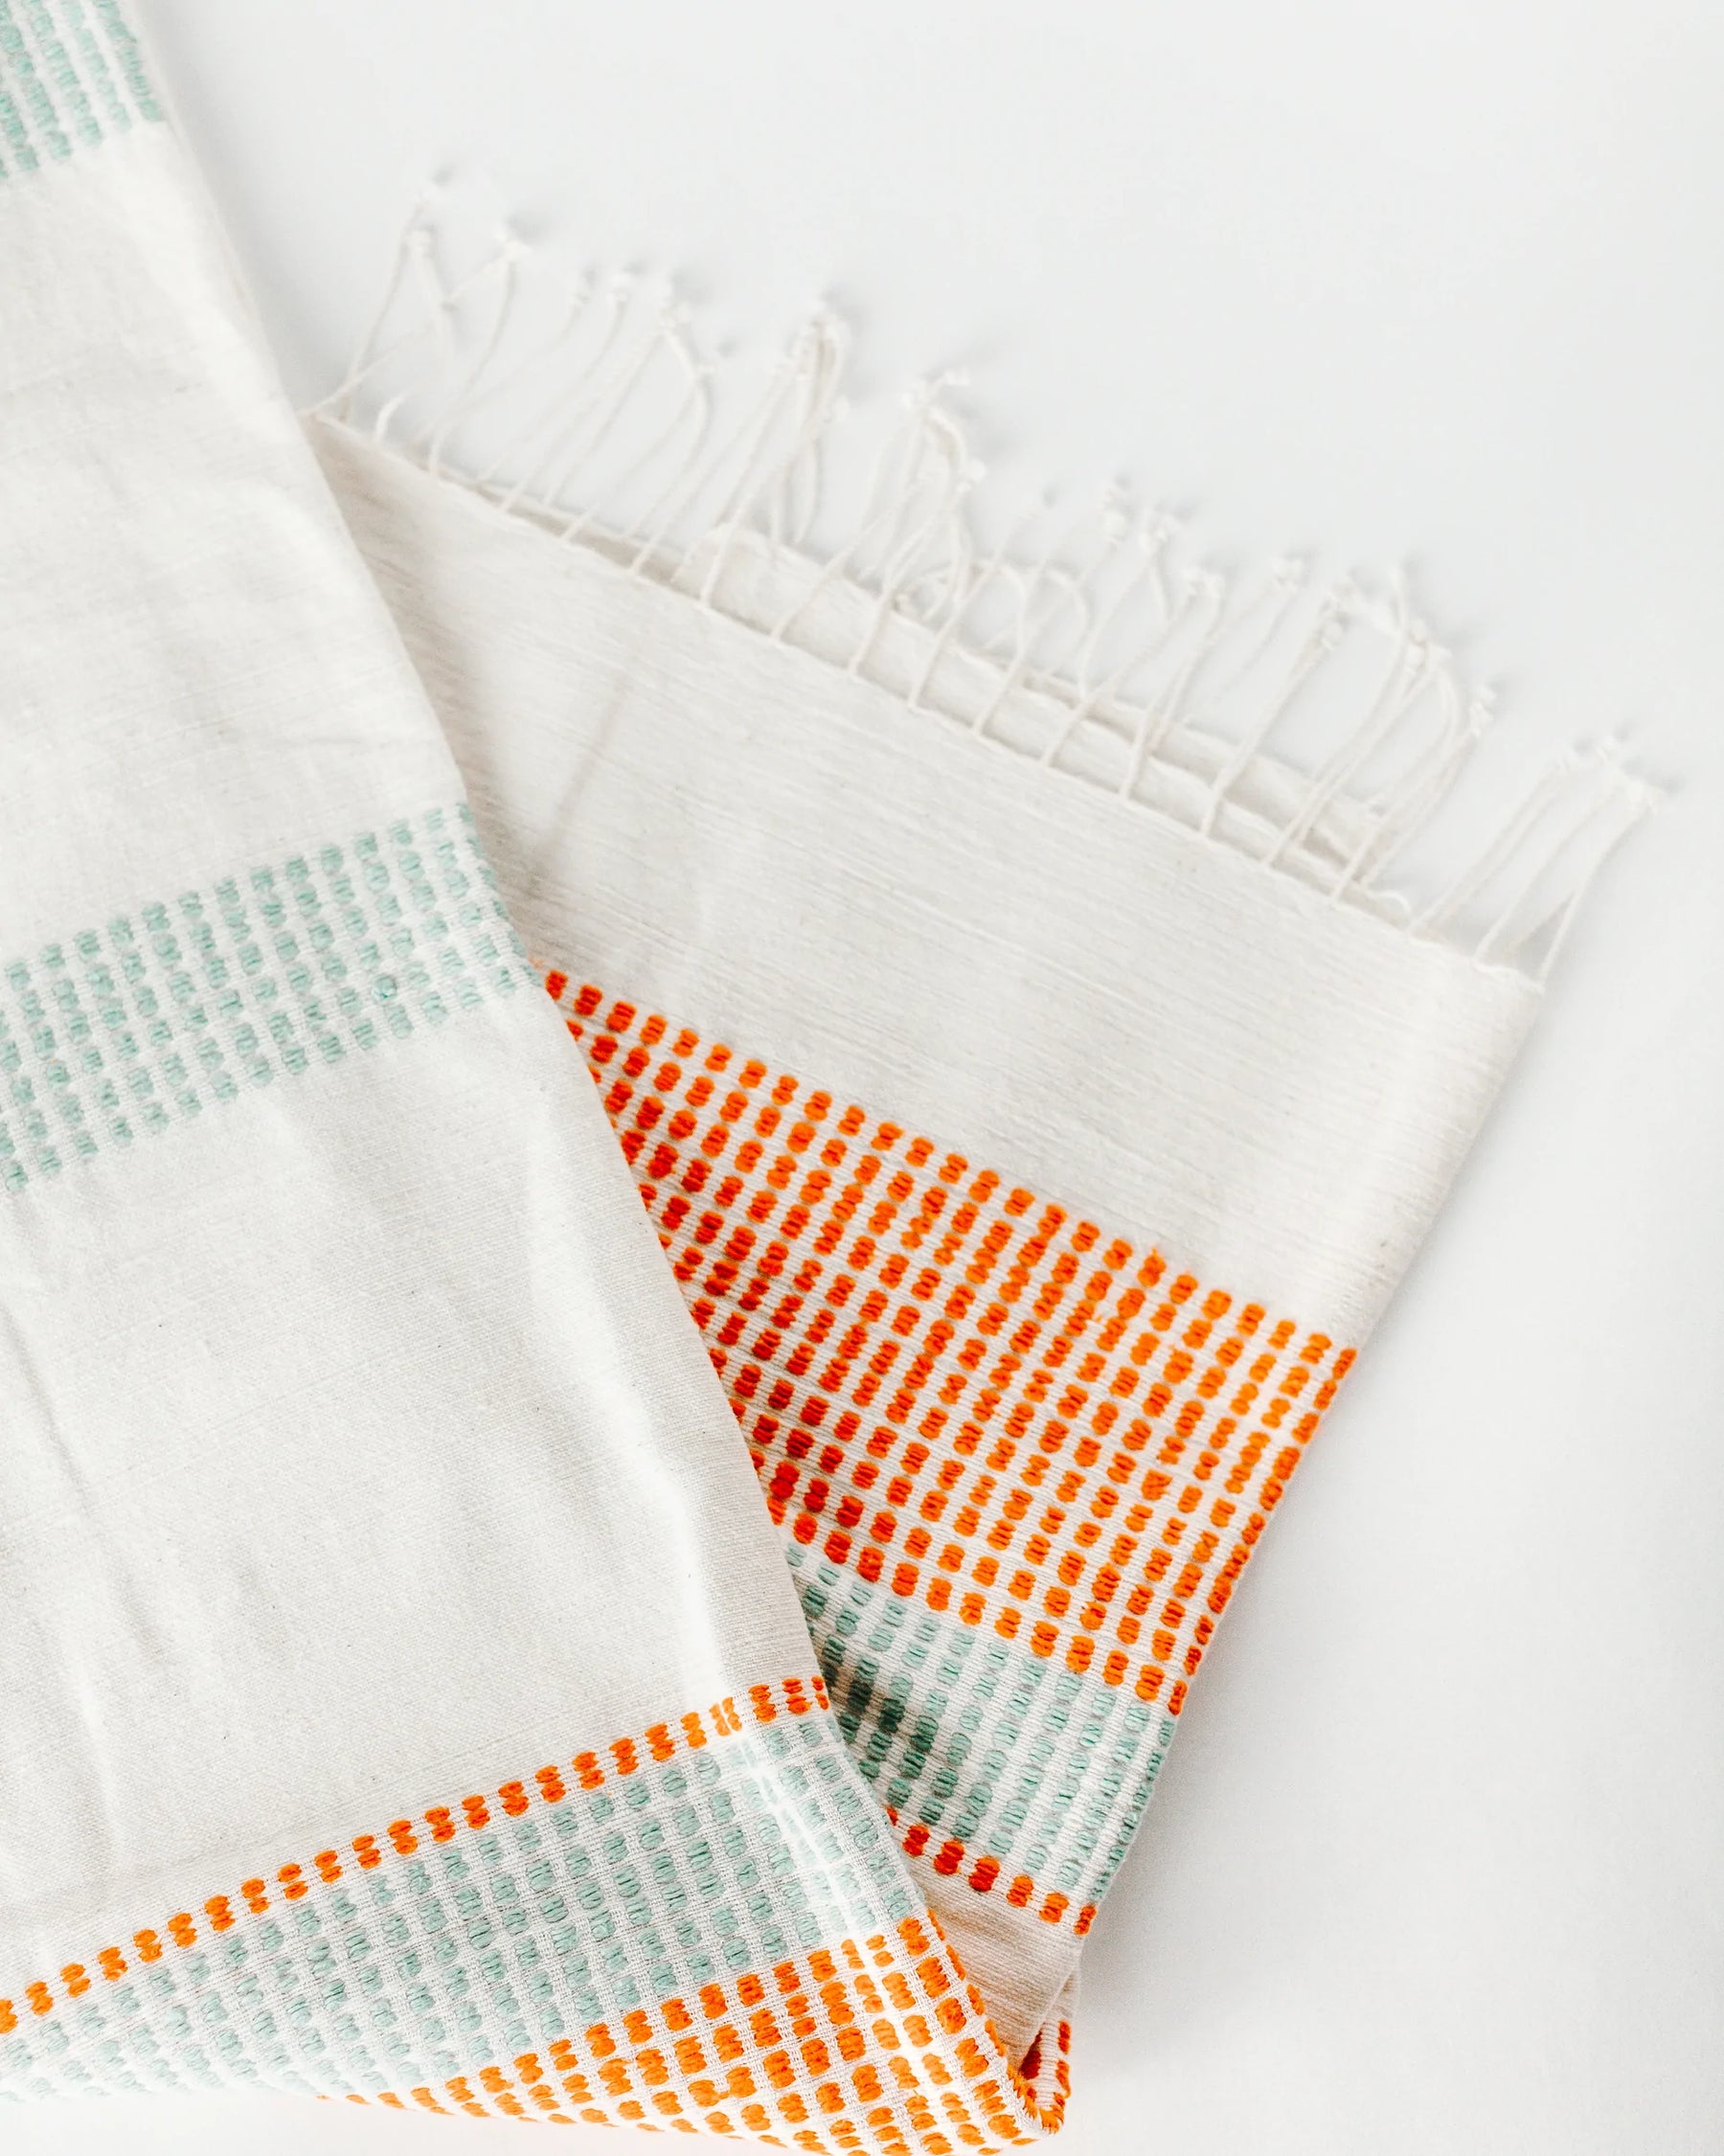 HYGGE CAVE | A CAMDEN COTTON BATH TOWEL, A NECESSARY ACCOMPANYING ITEM FOR TRAVEL